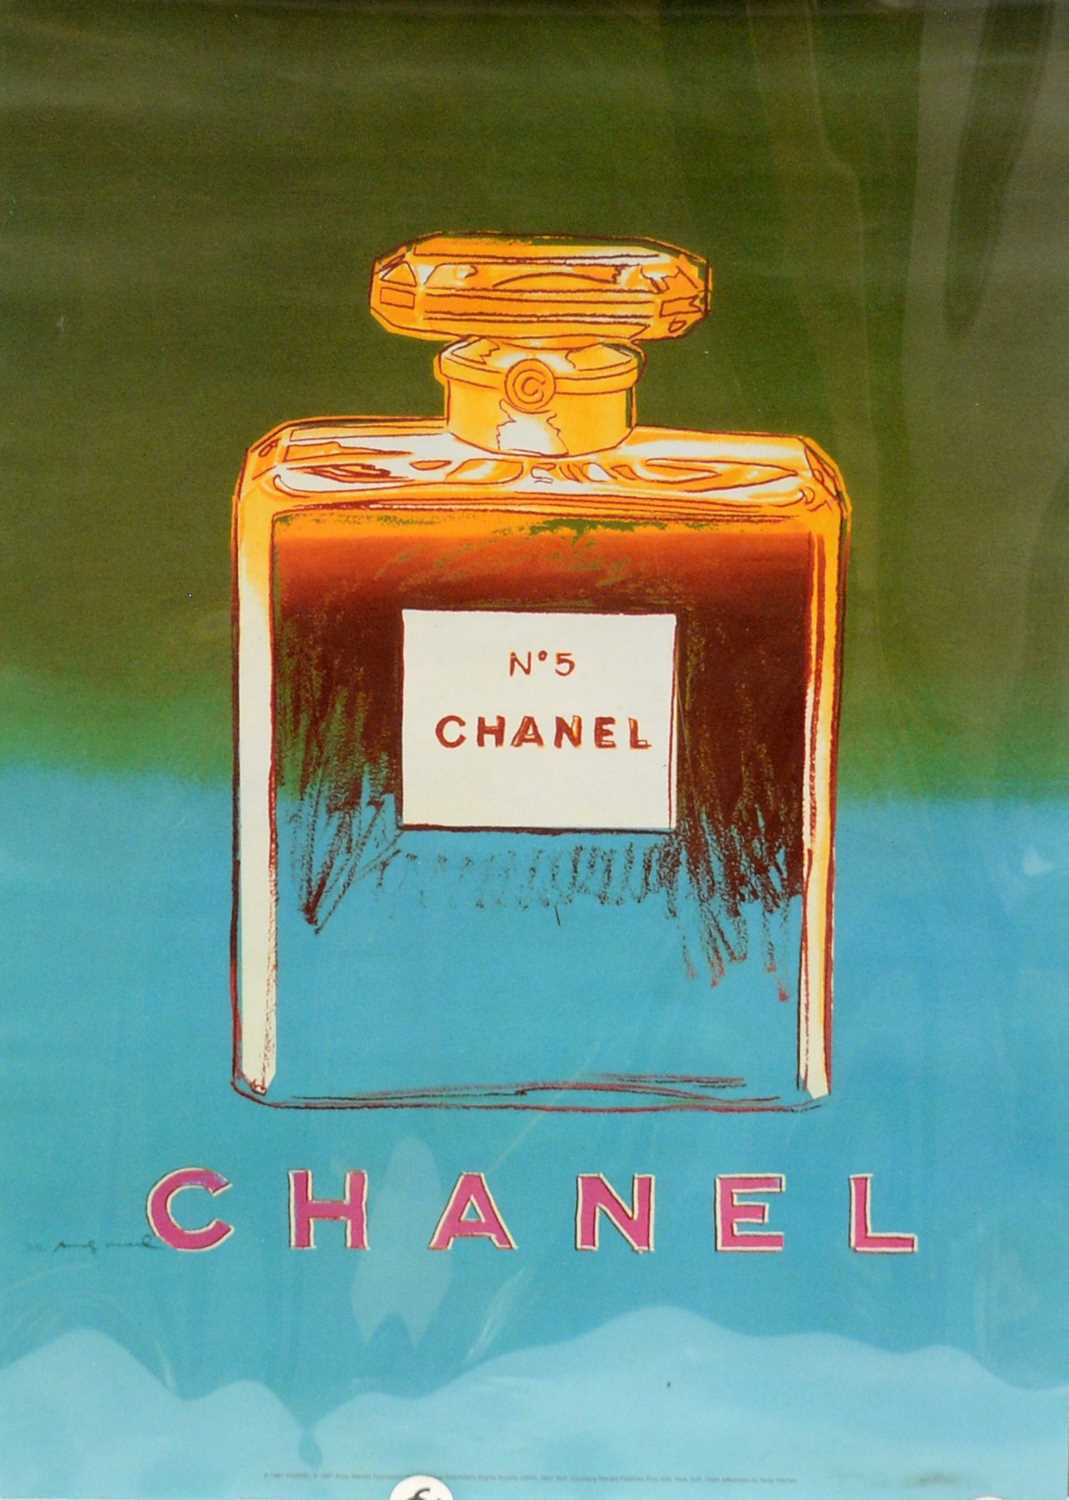 Lot 201 - A Chanel No. 5 perfume advertising poster